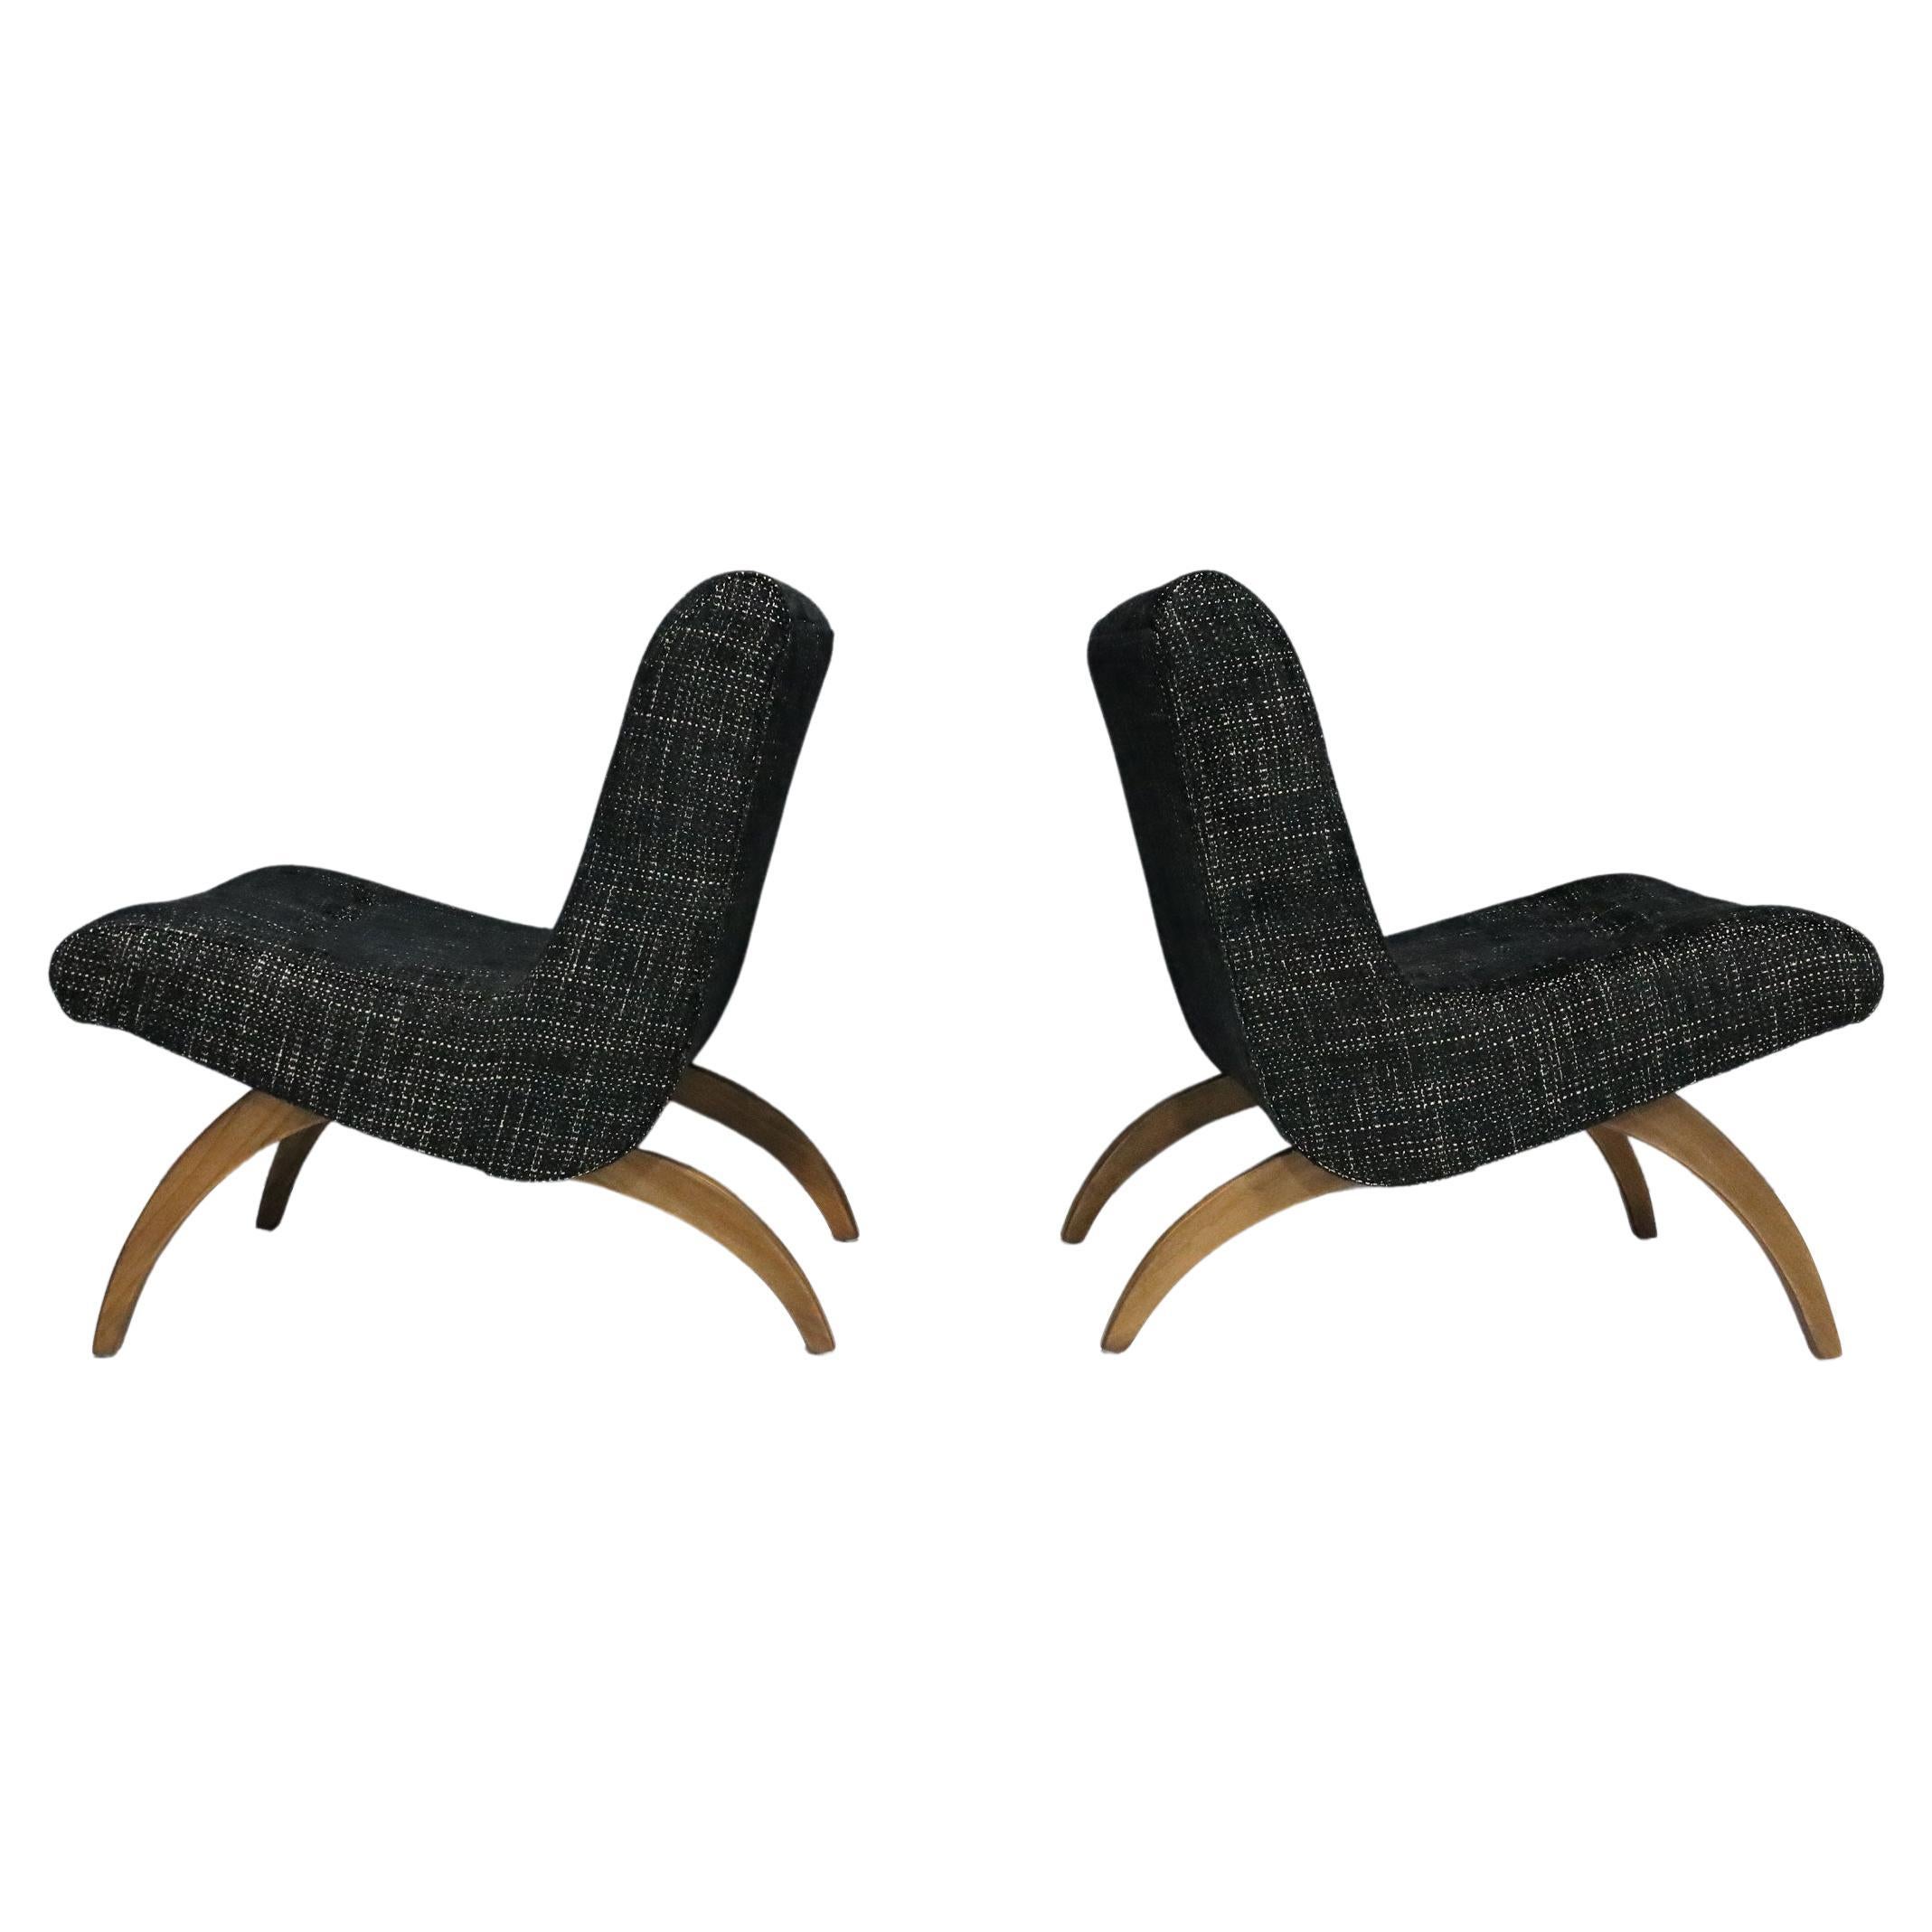 Milo Baughman Scoop Chairs in New Upholstery, 1958 For Sale